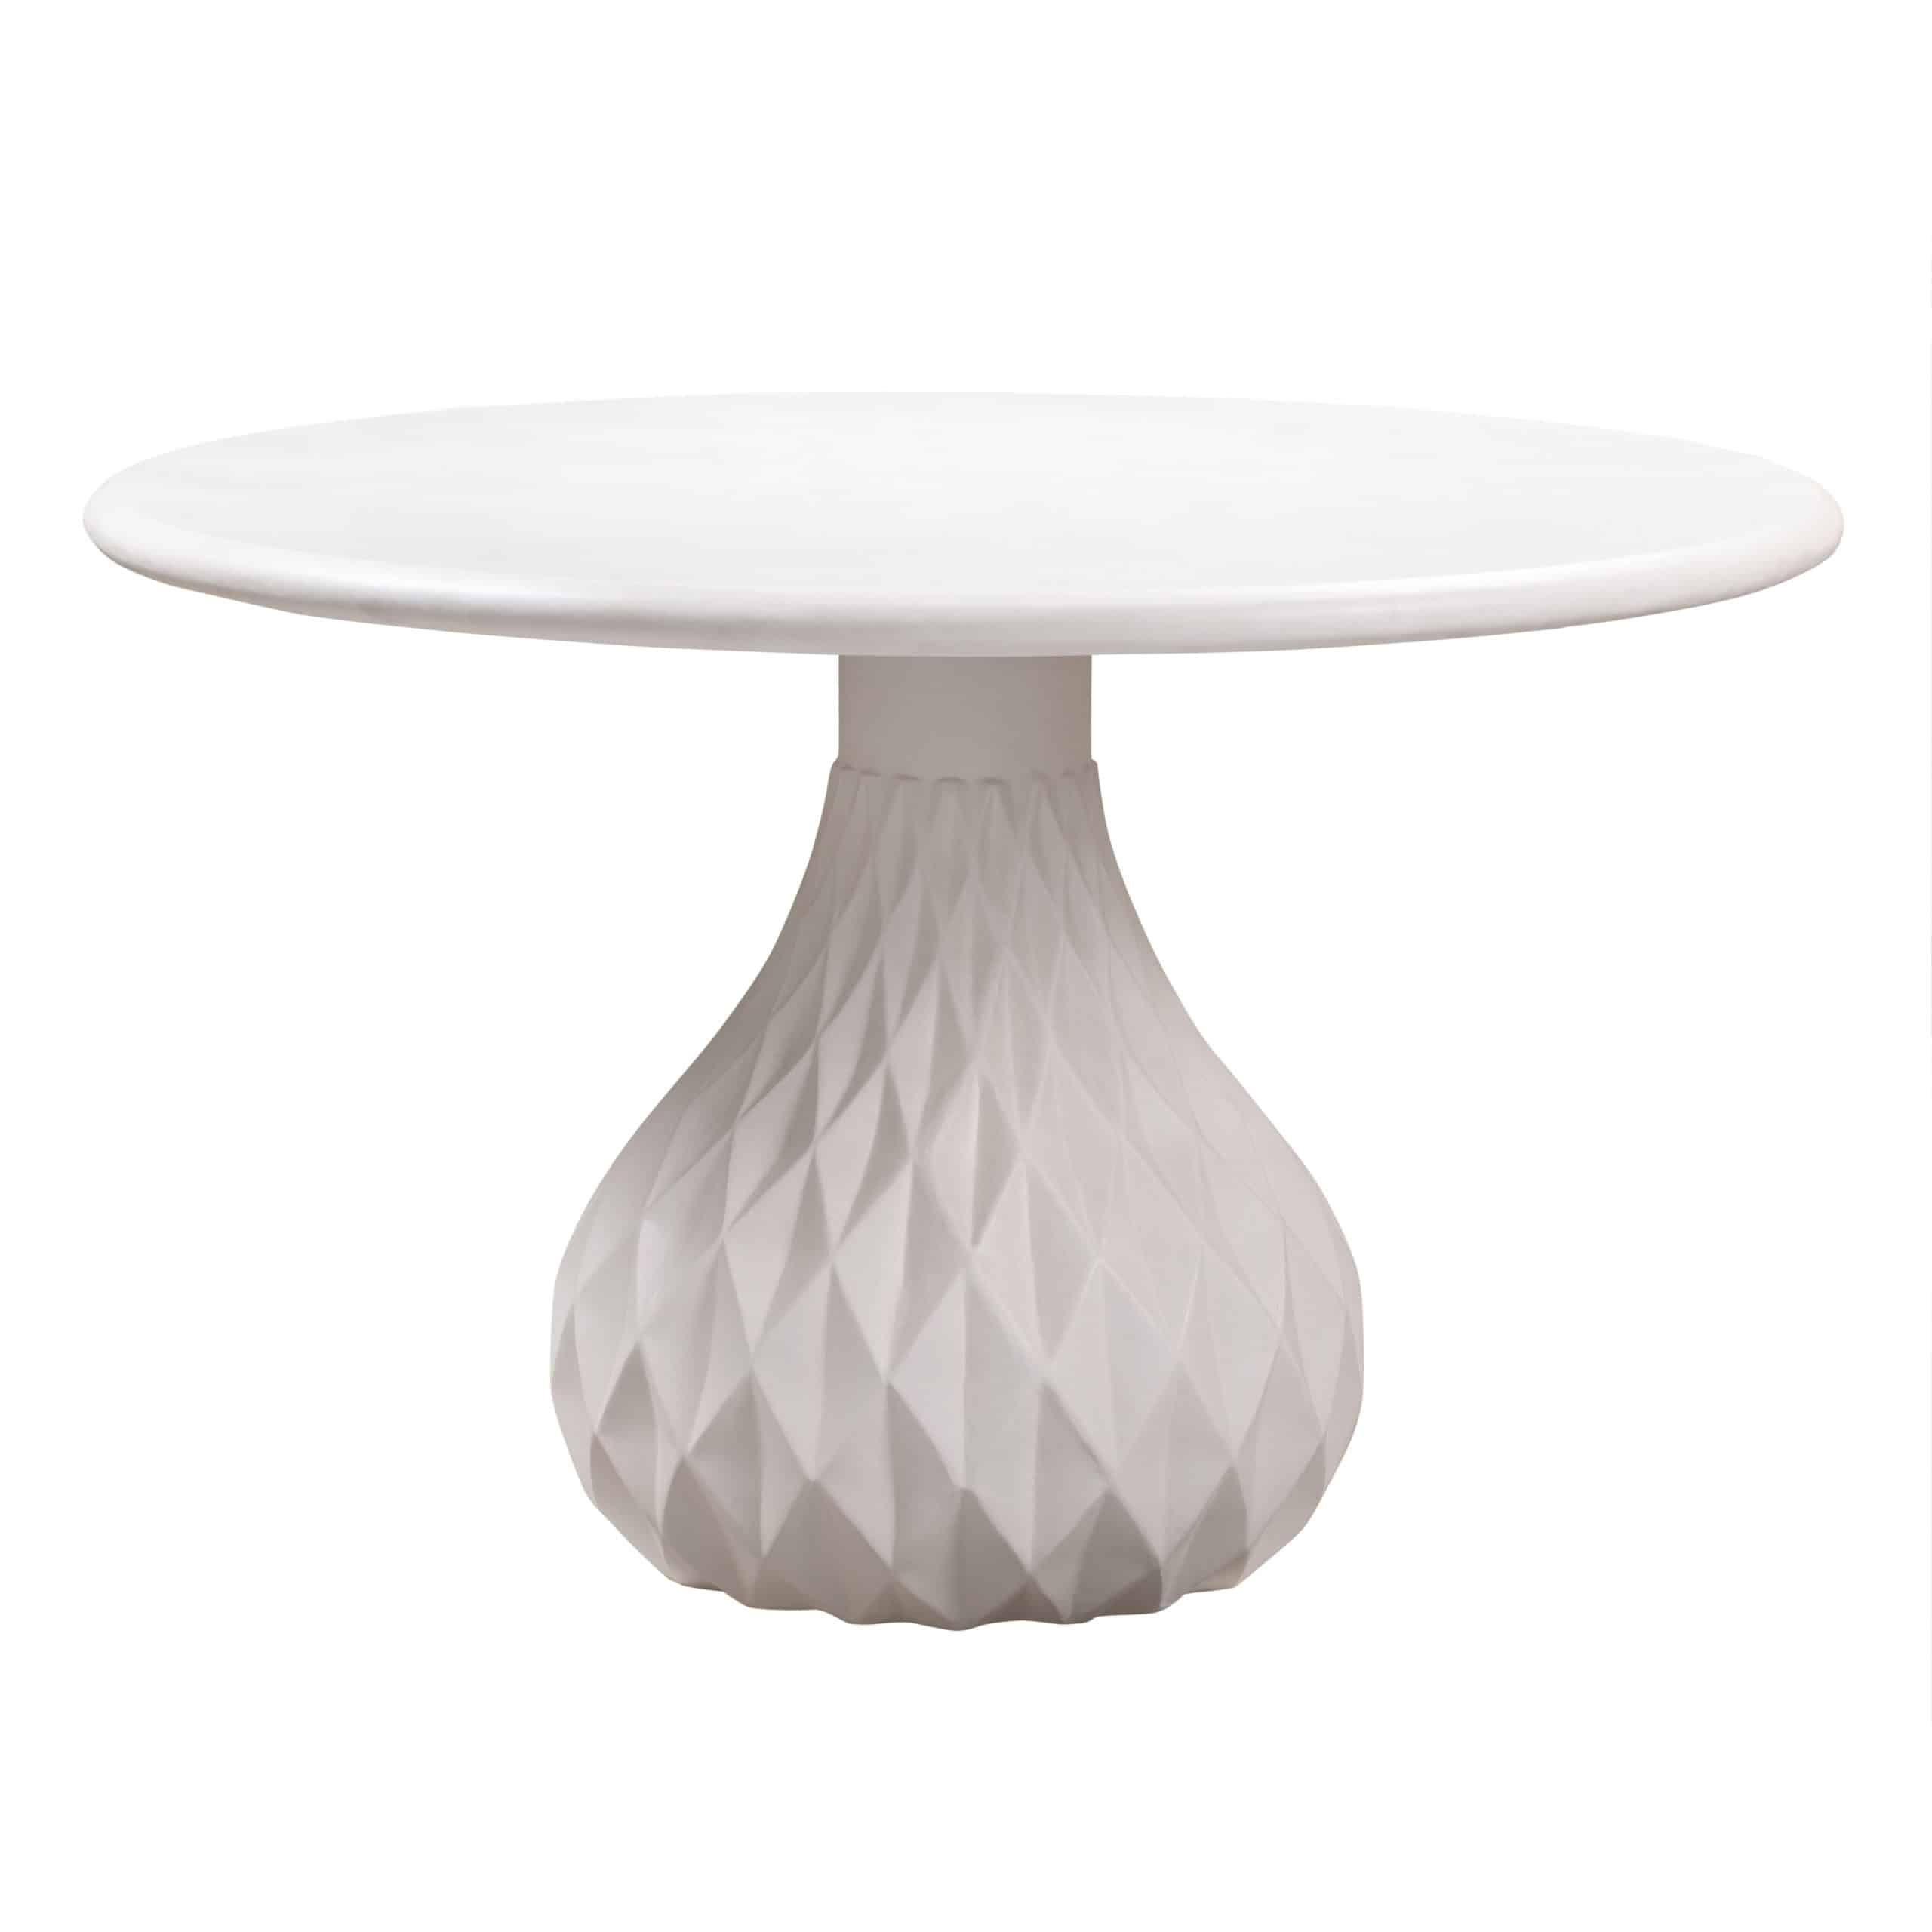 Ivory marble table